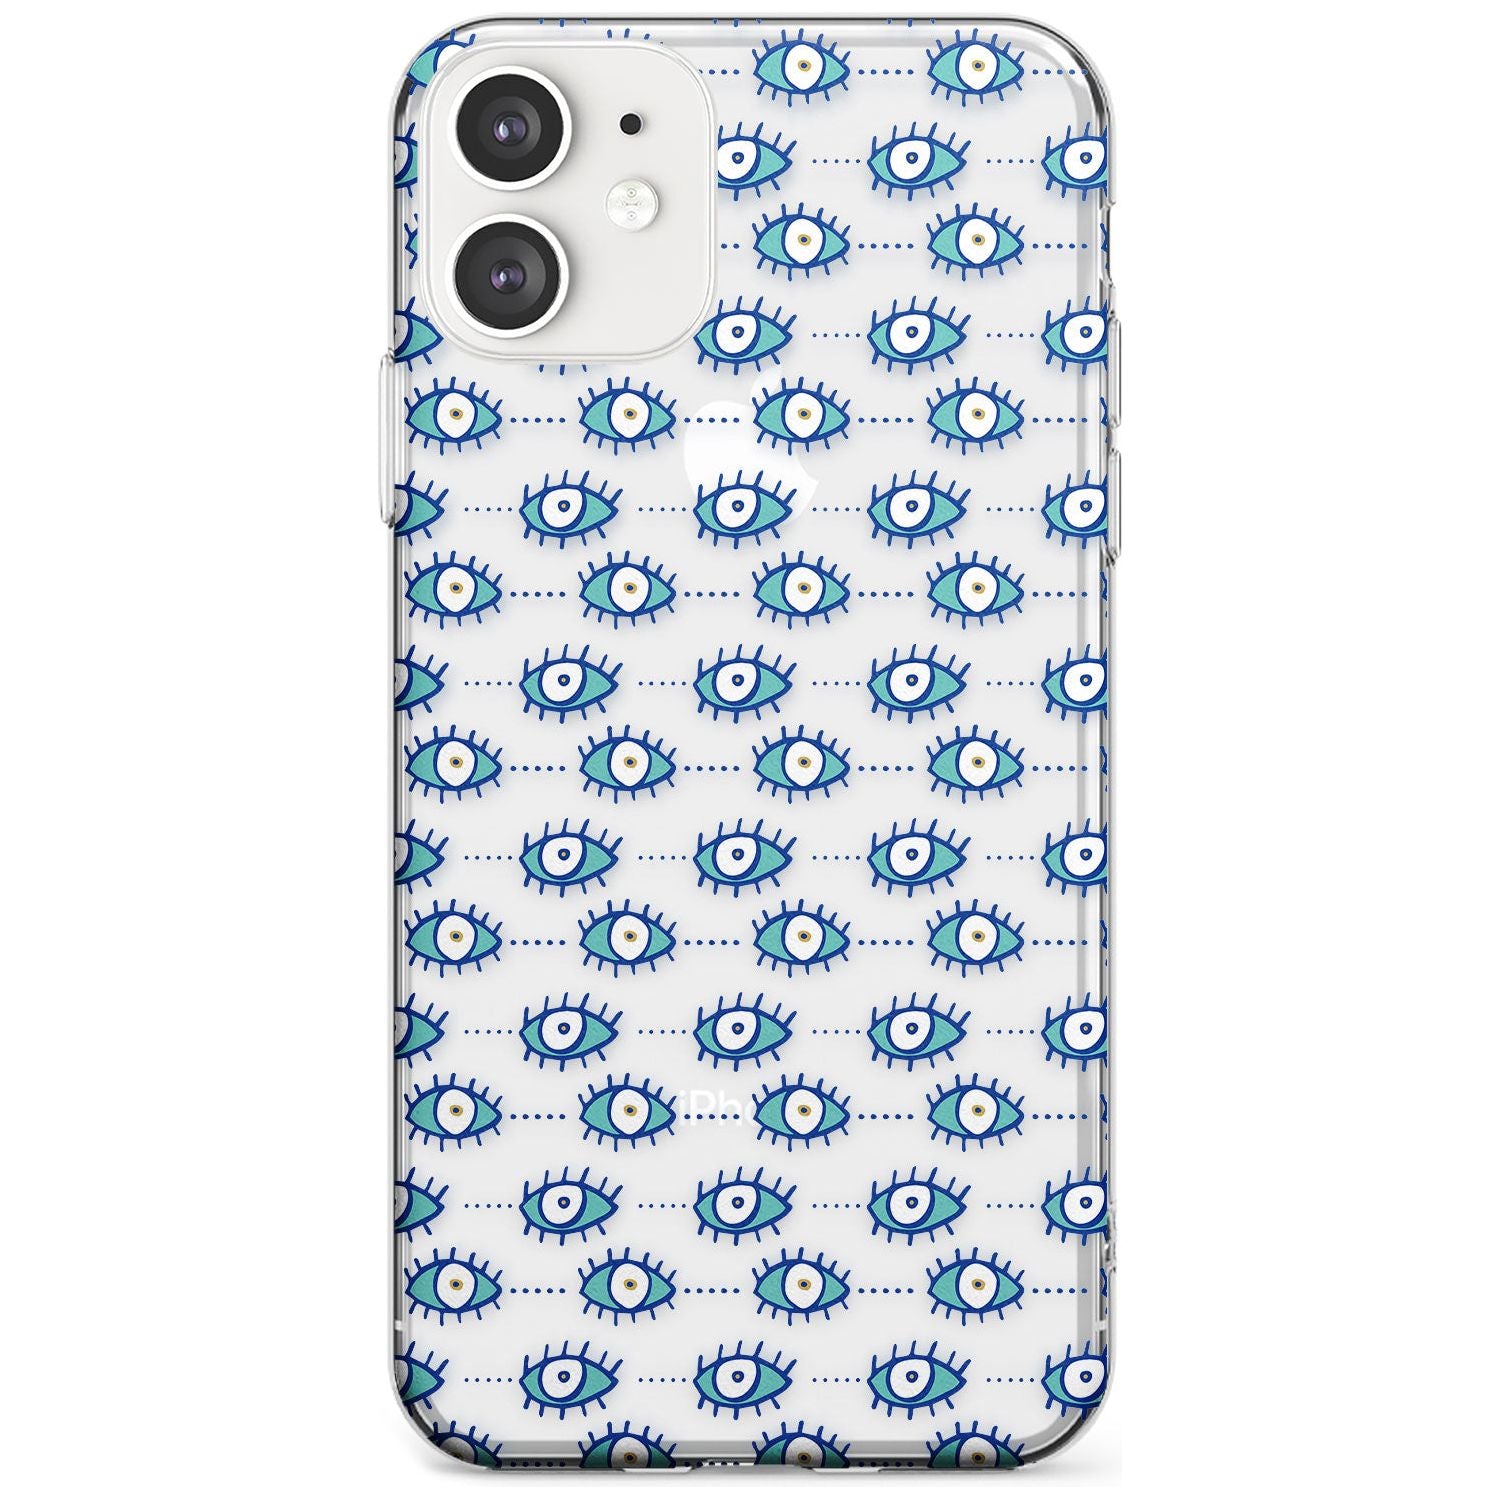 Crazy Eyes (Clear) Psychedelic Eyes Pattern Slim TPU Phone Case for iPhone 11